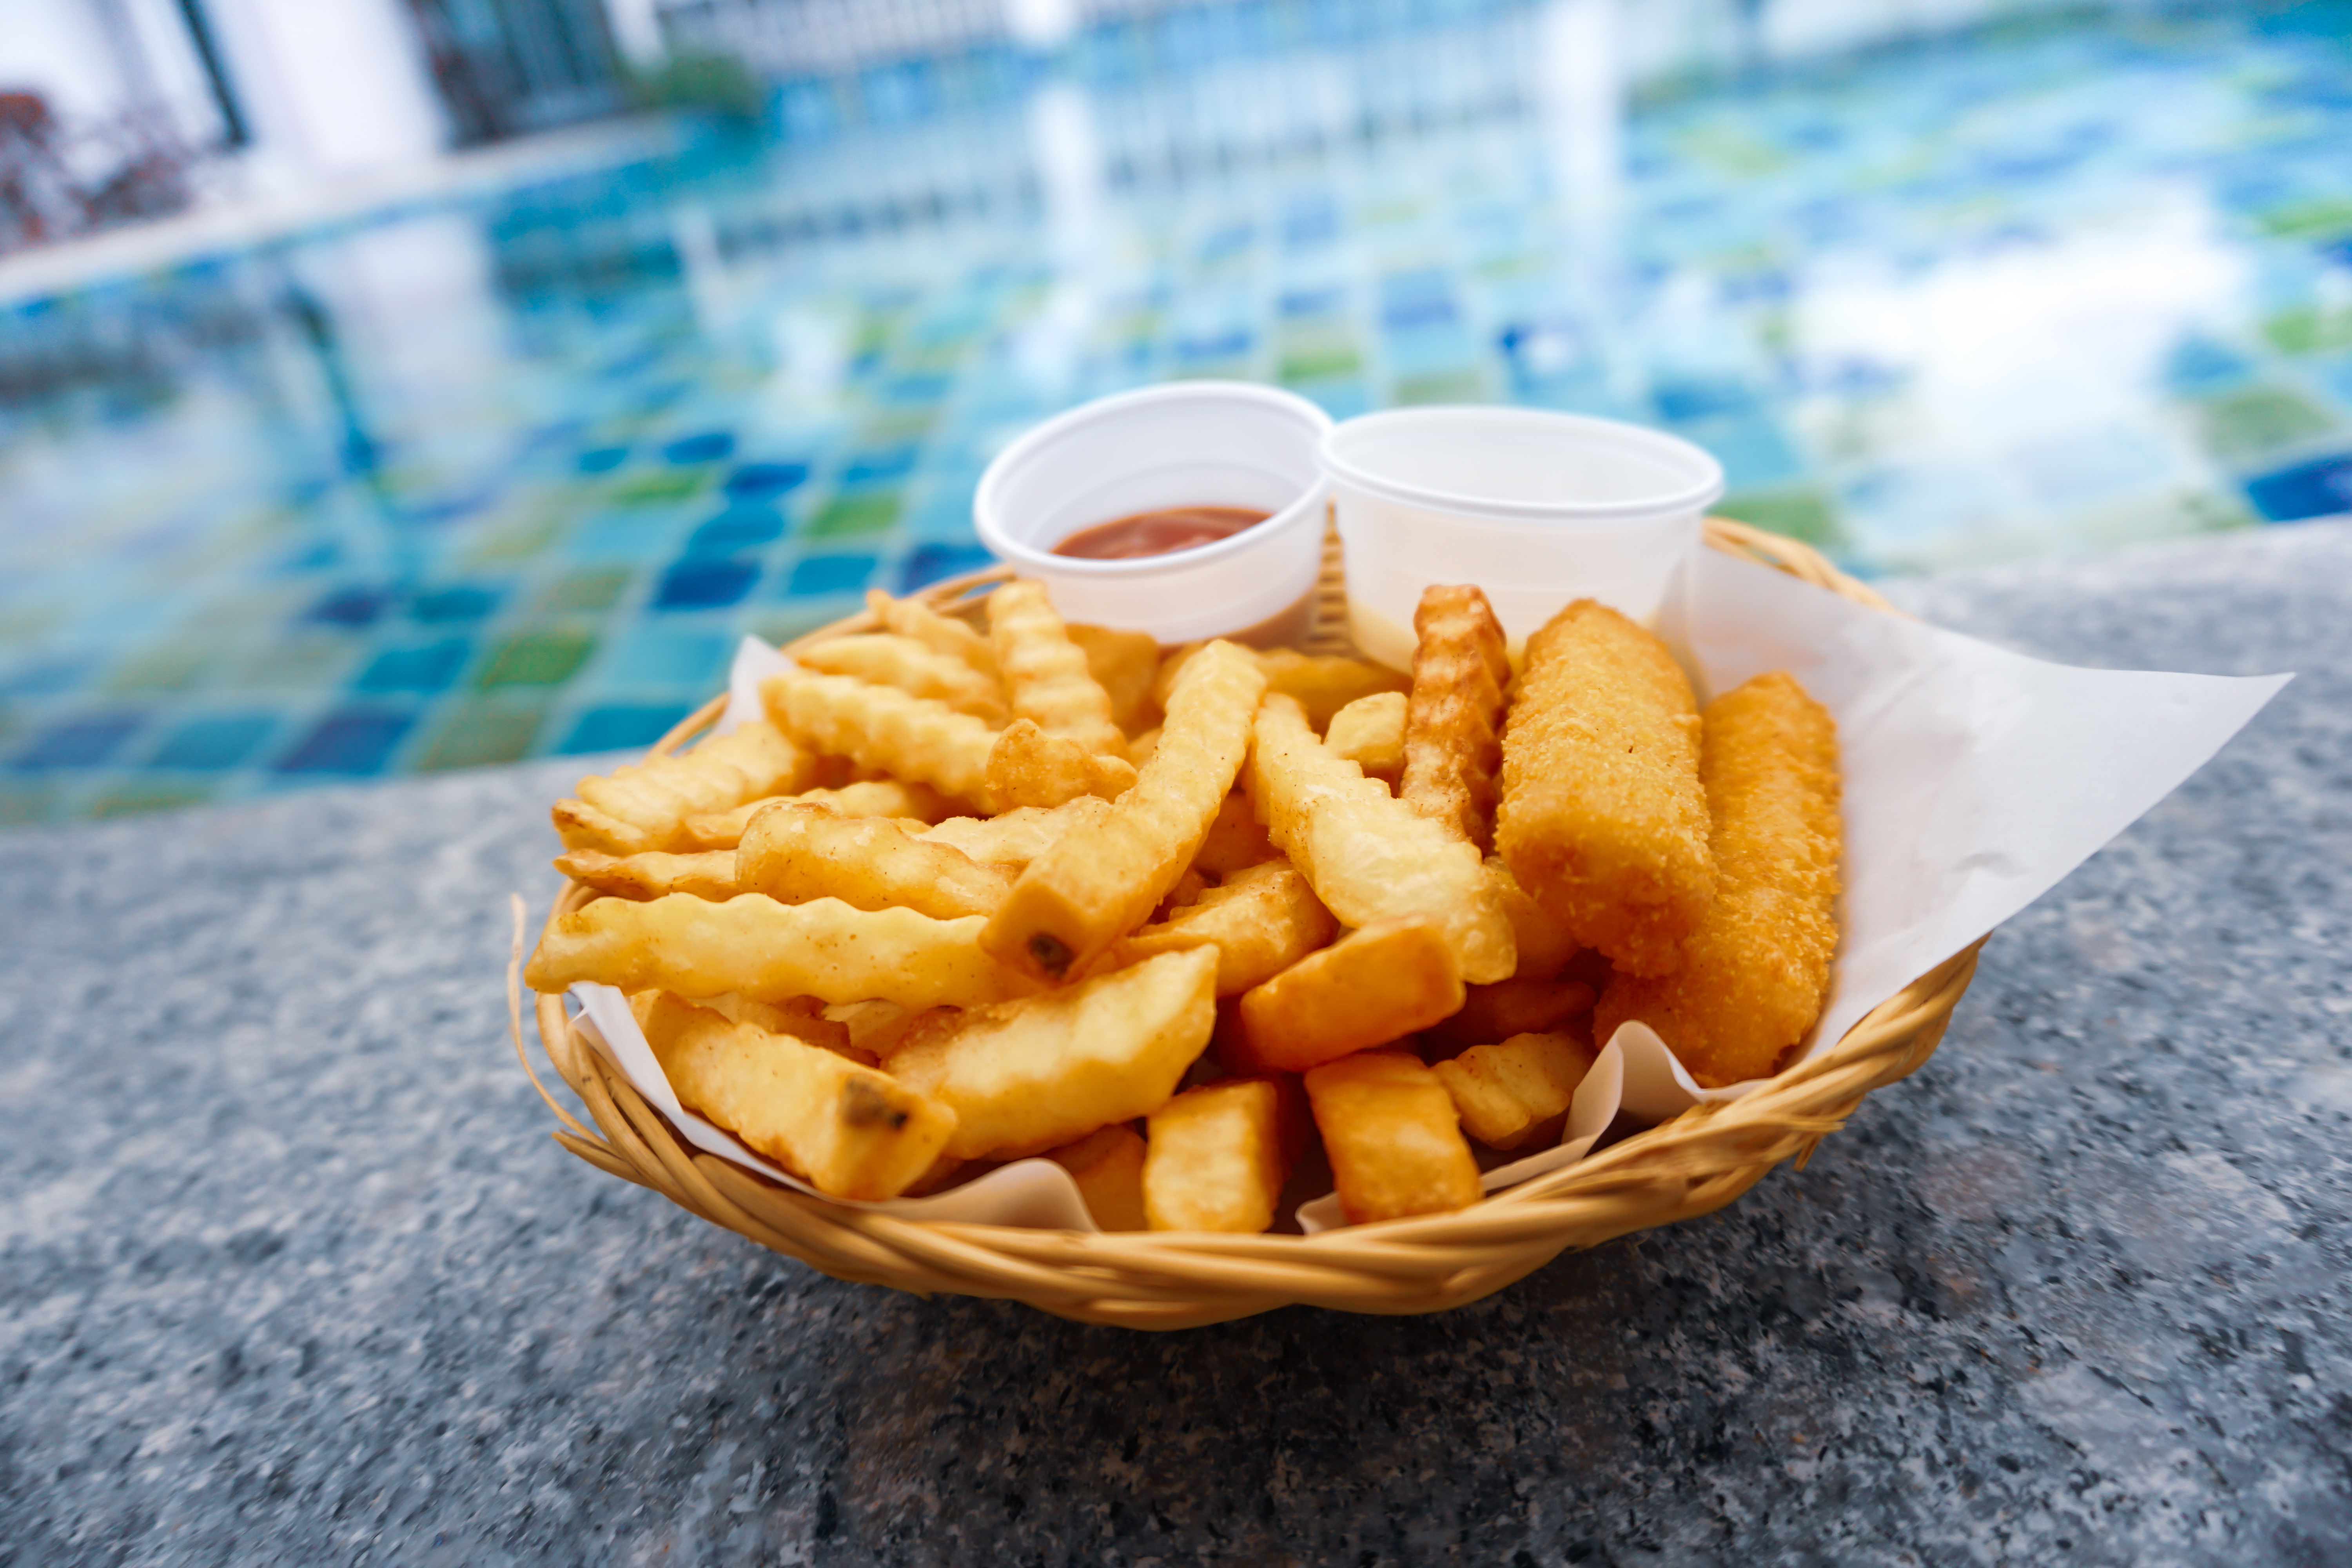 Basket of french fries sit alongside a pool.